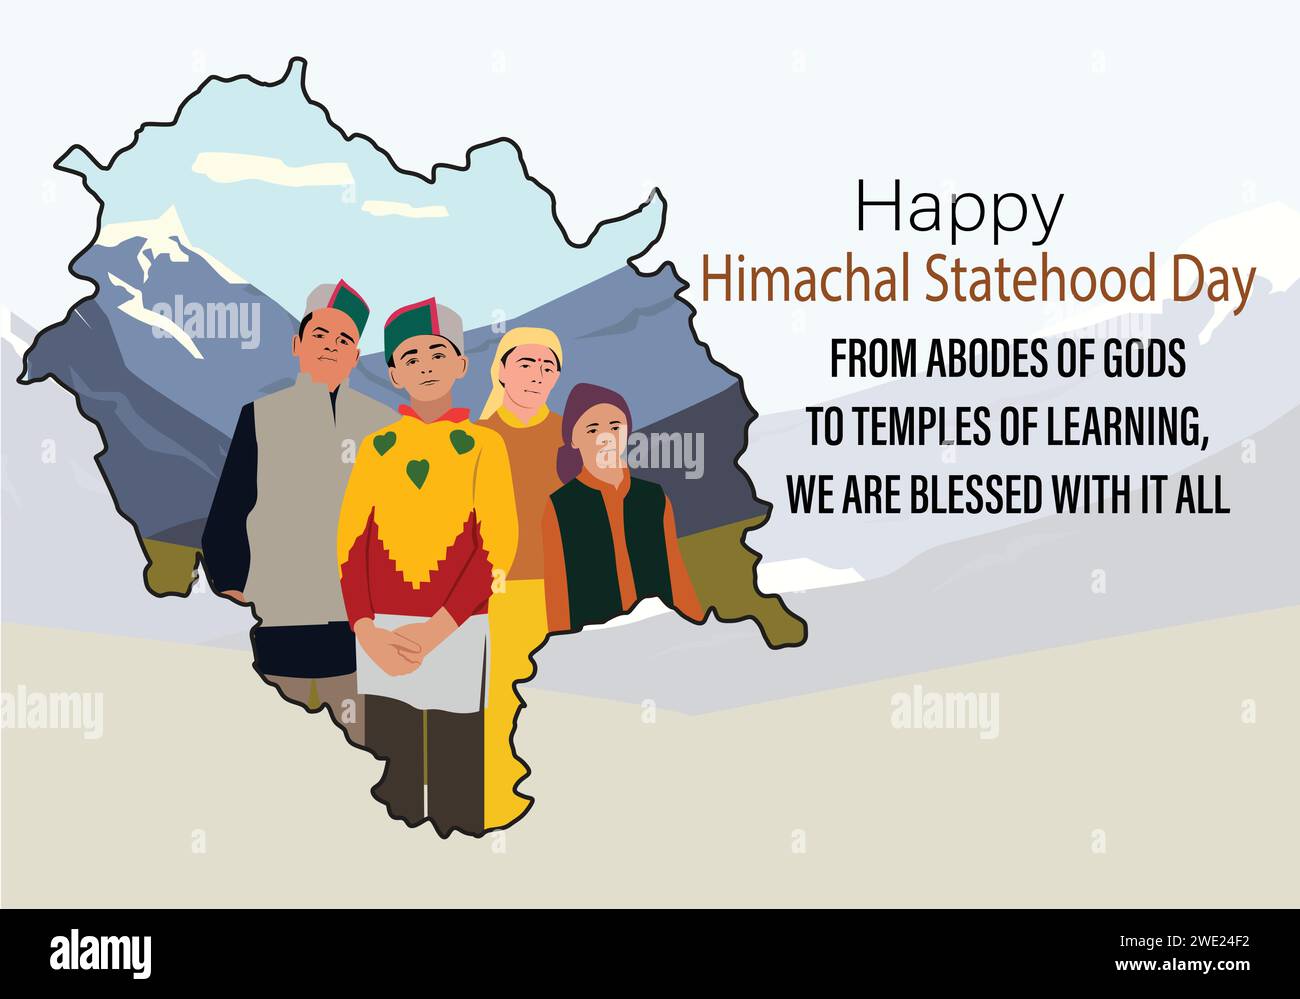 Vector illustration poster of Himachal Statehood day, people wearing traditional dress with Himachal map background. himachal statehood day, 25 januar Stock Vector